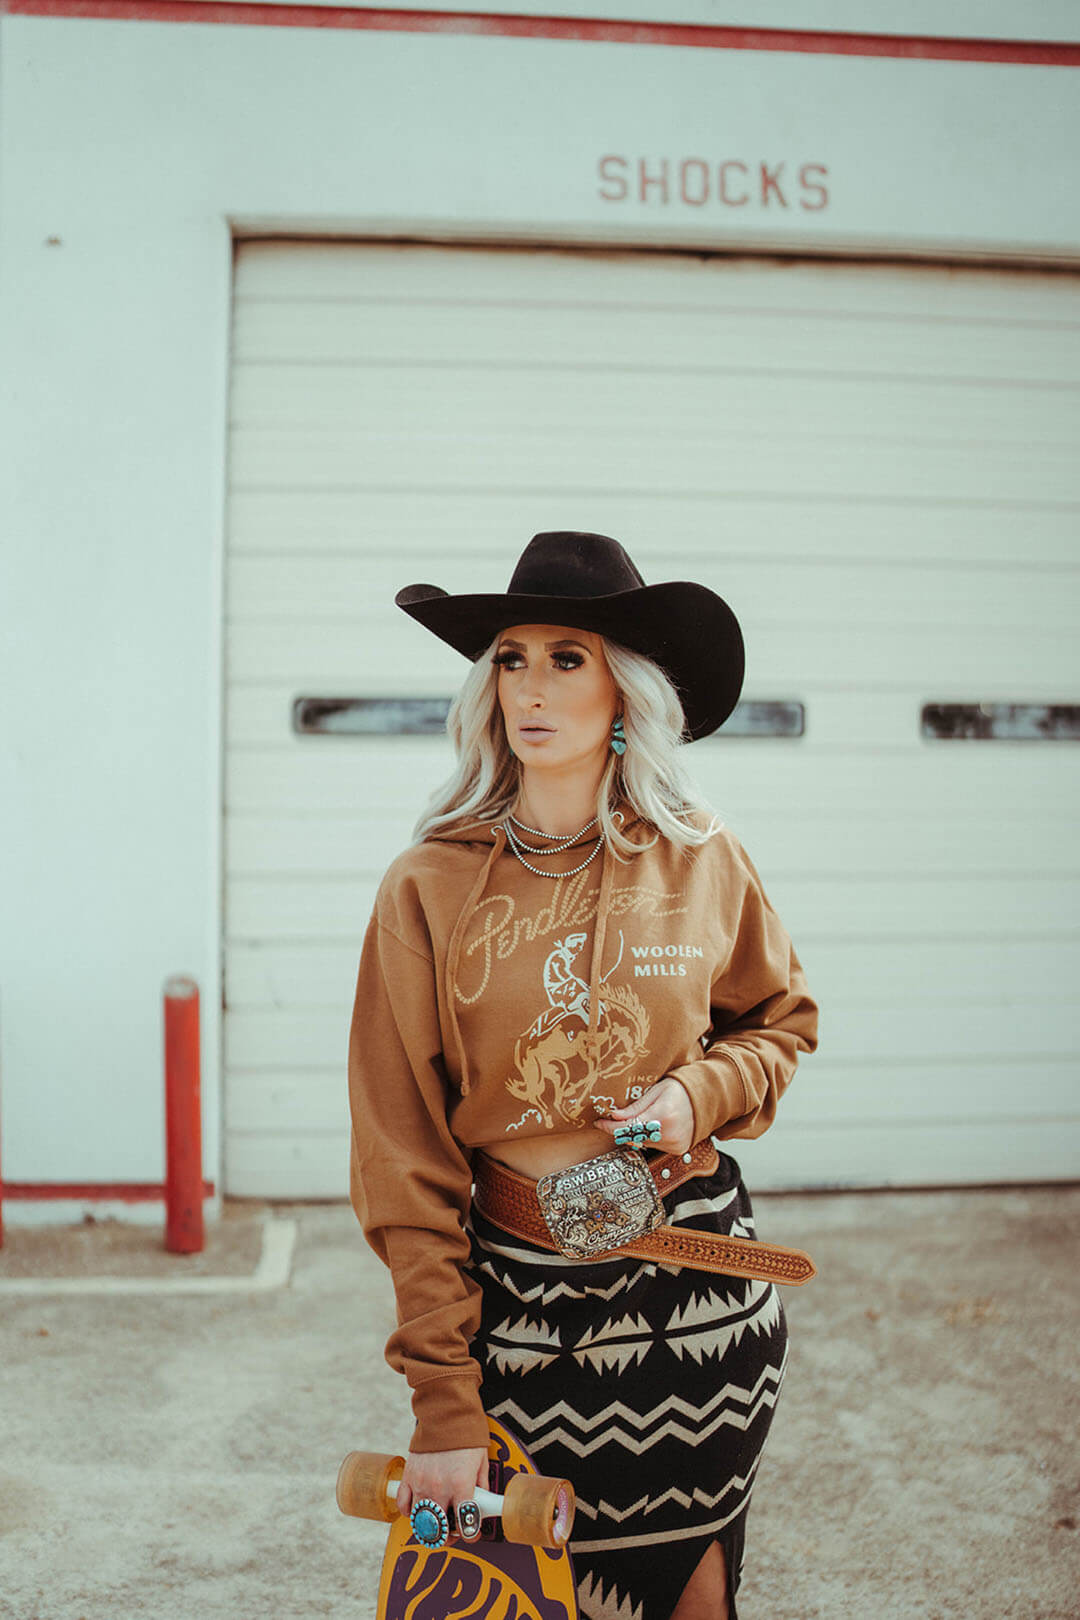 Woman wearing the Pendelton Woolen Mills Rodeo hoodie in Gold color.  The hoodie features a scene of cowboy riding a bronc.  